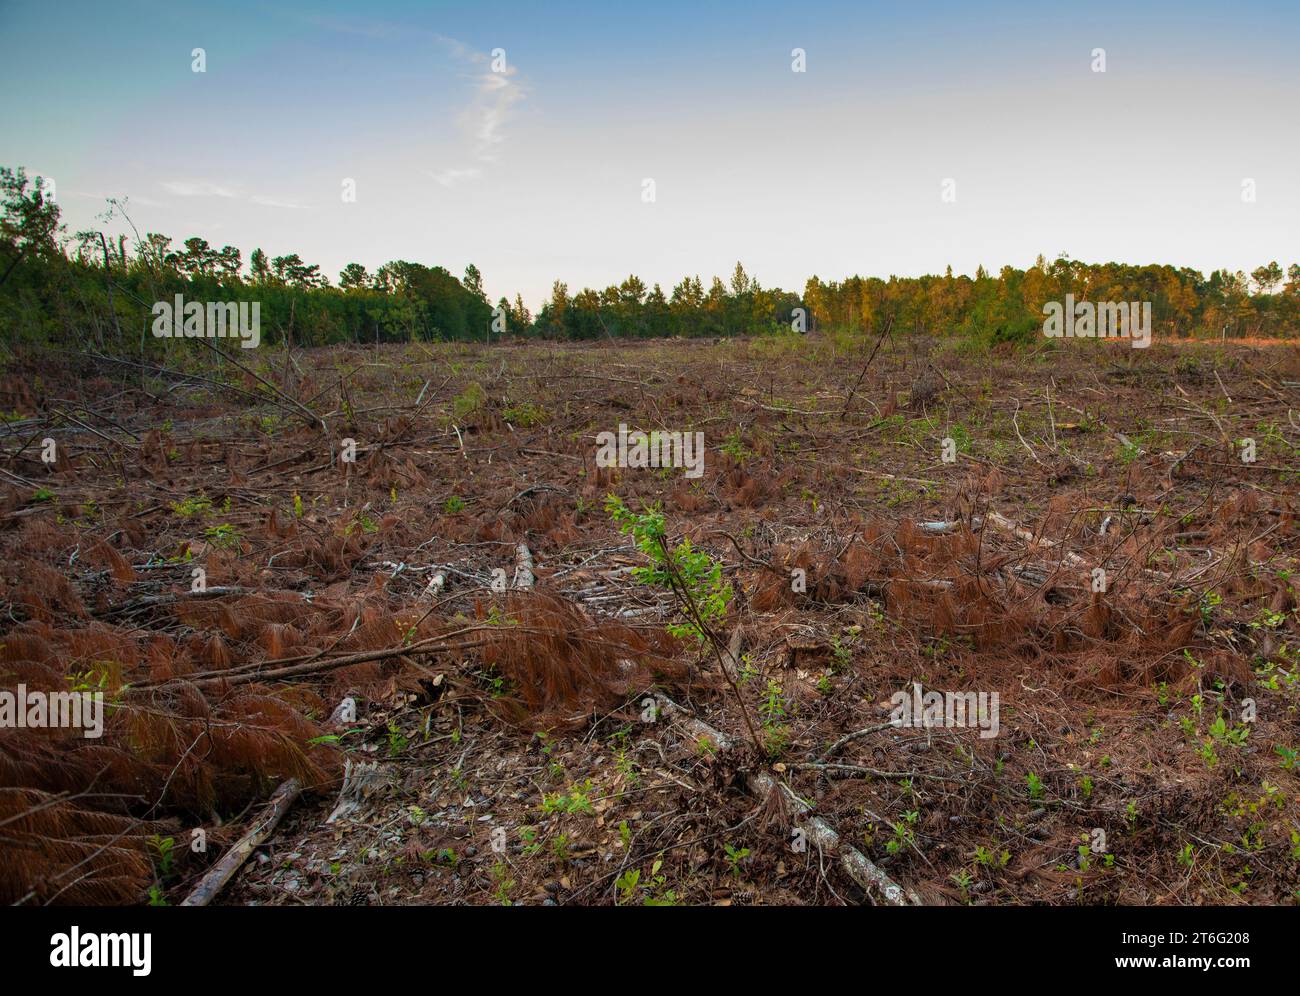 Wasted wood and debris from a clear cut logging operation and debris on the ground Stock Photo